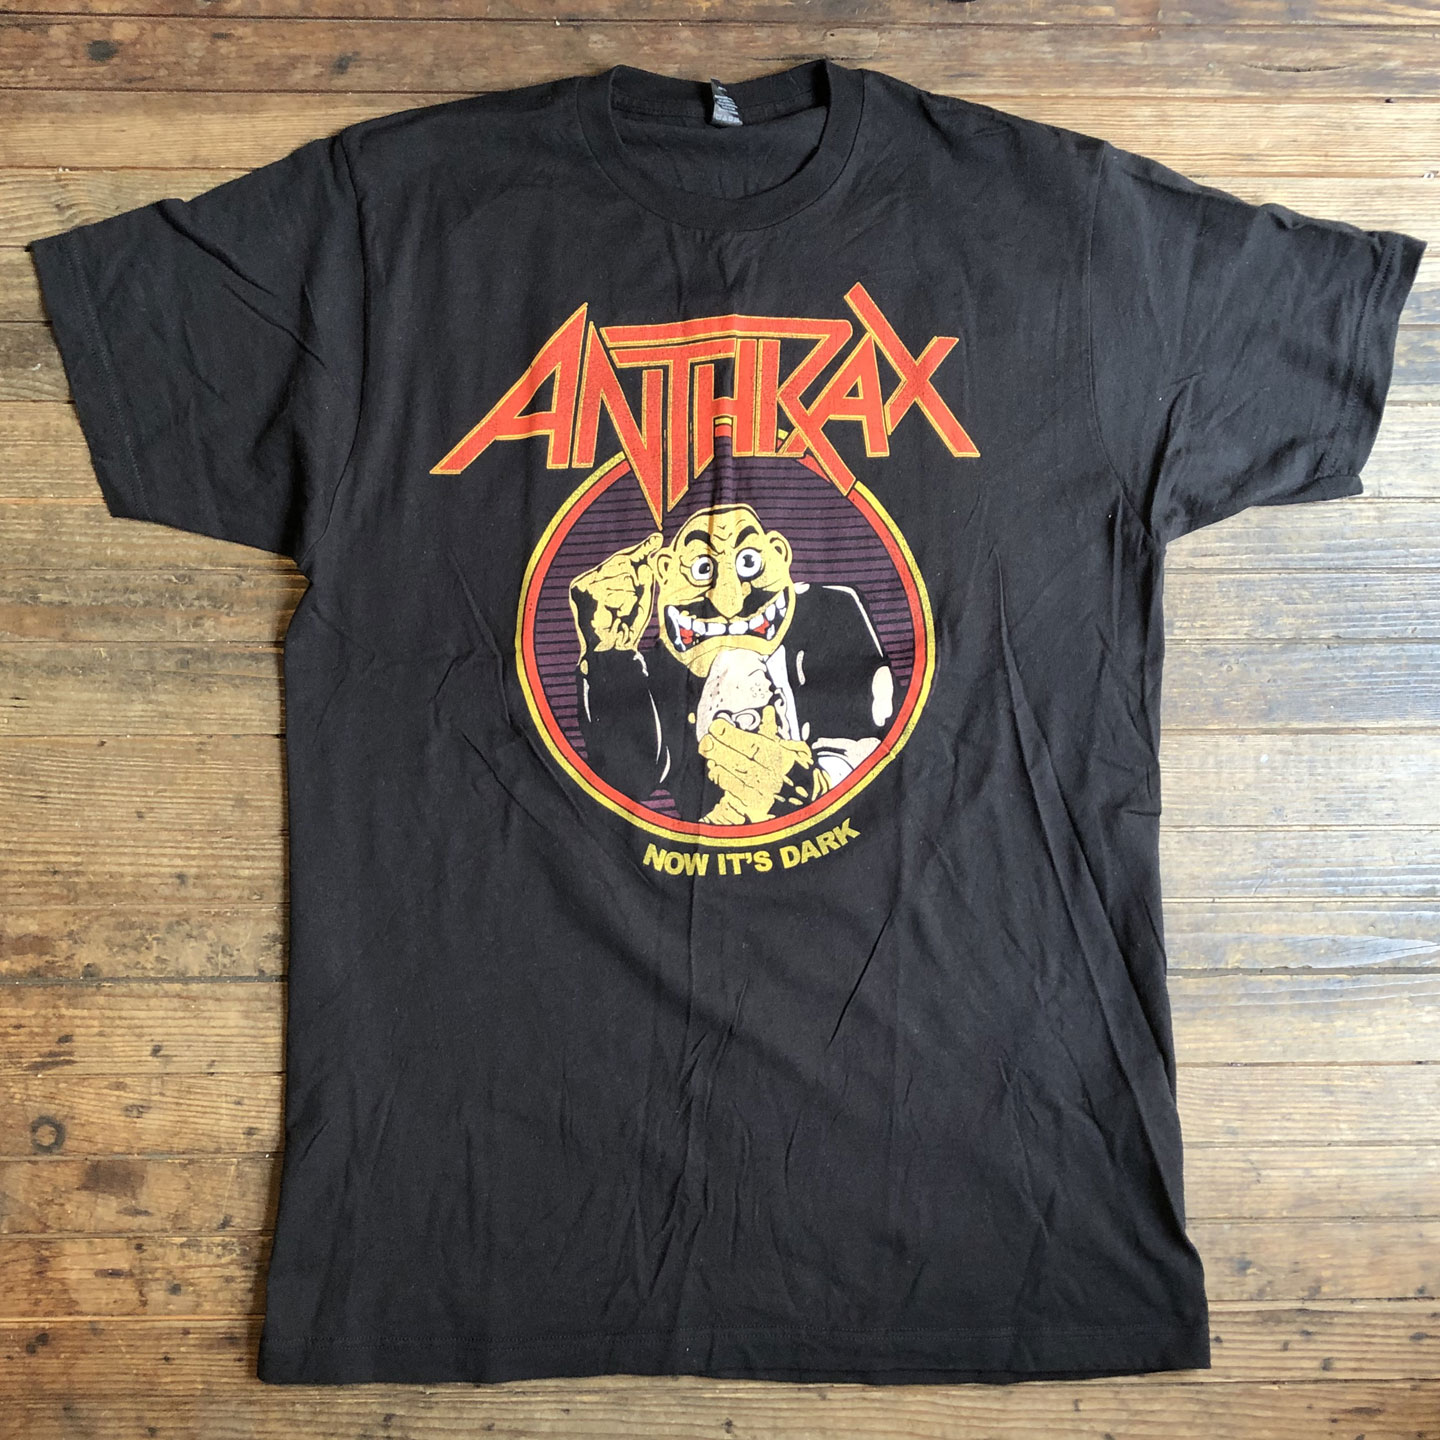 USED! ANTHRAX Tシャツ NOW IT'S DARK OFFICIAL！